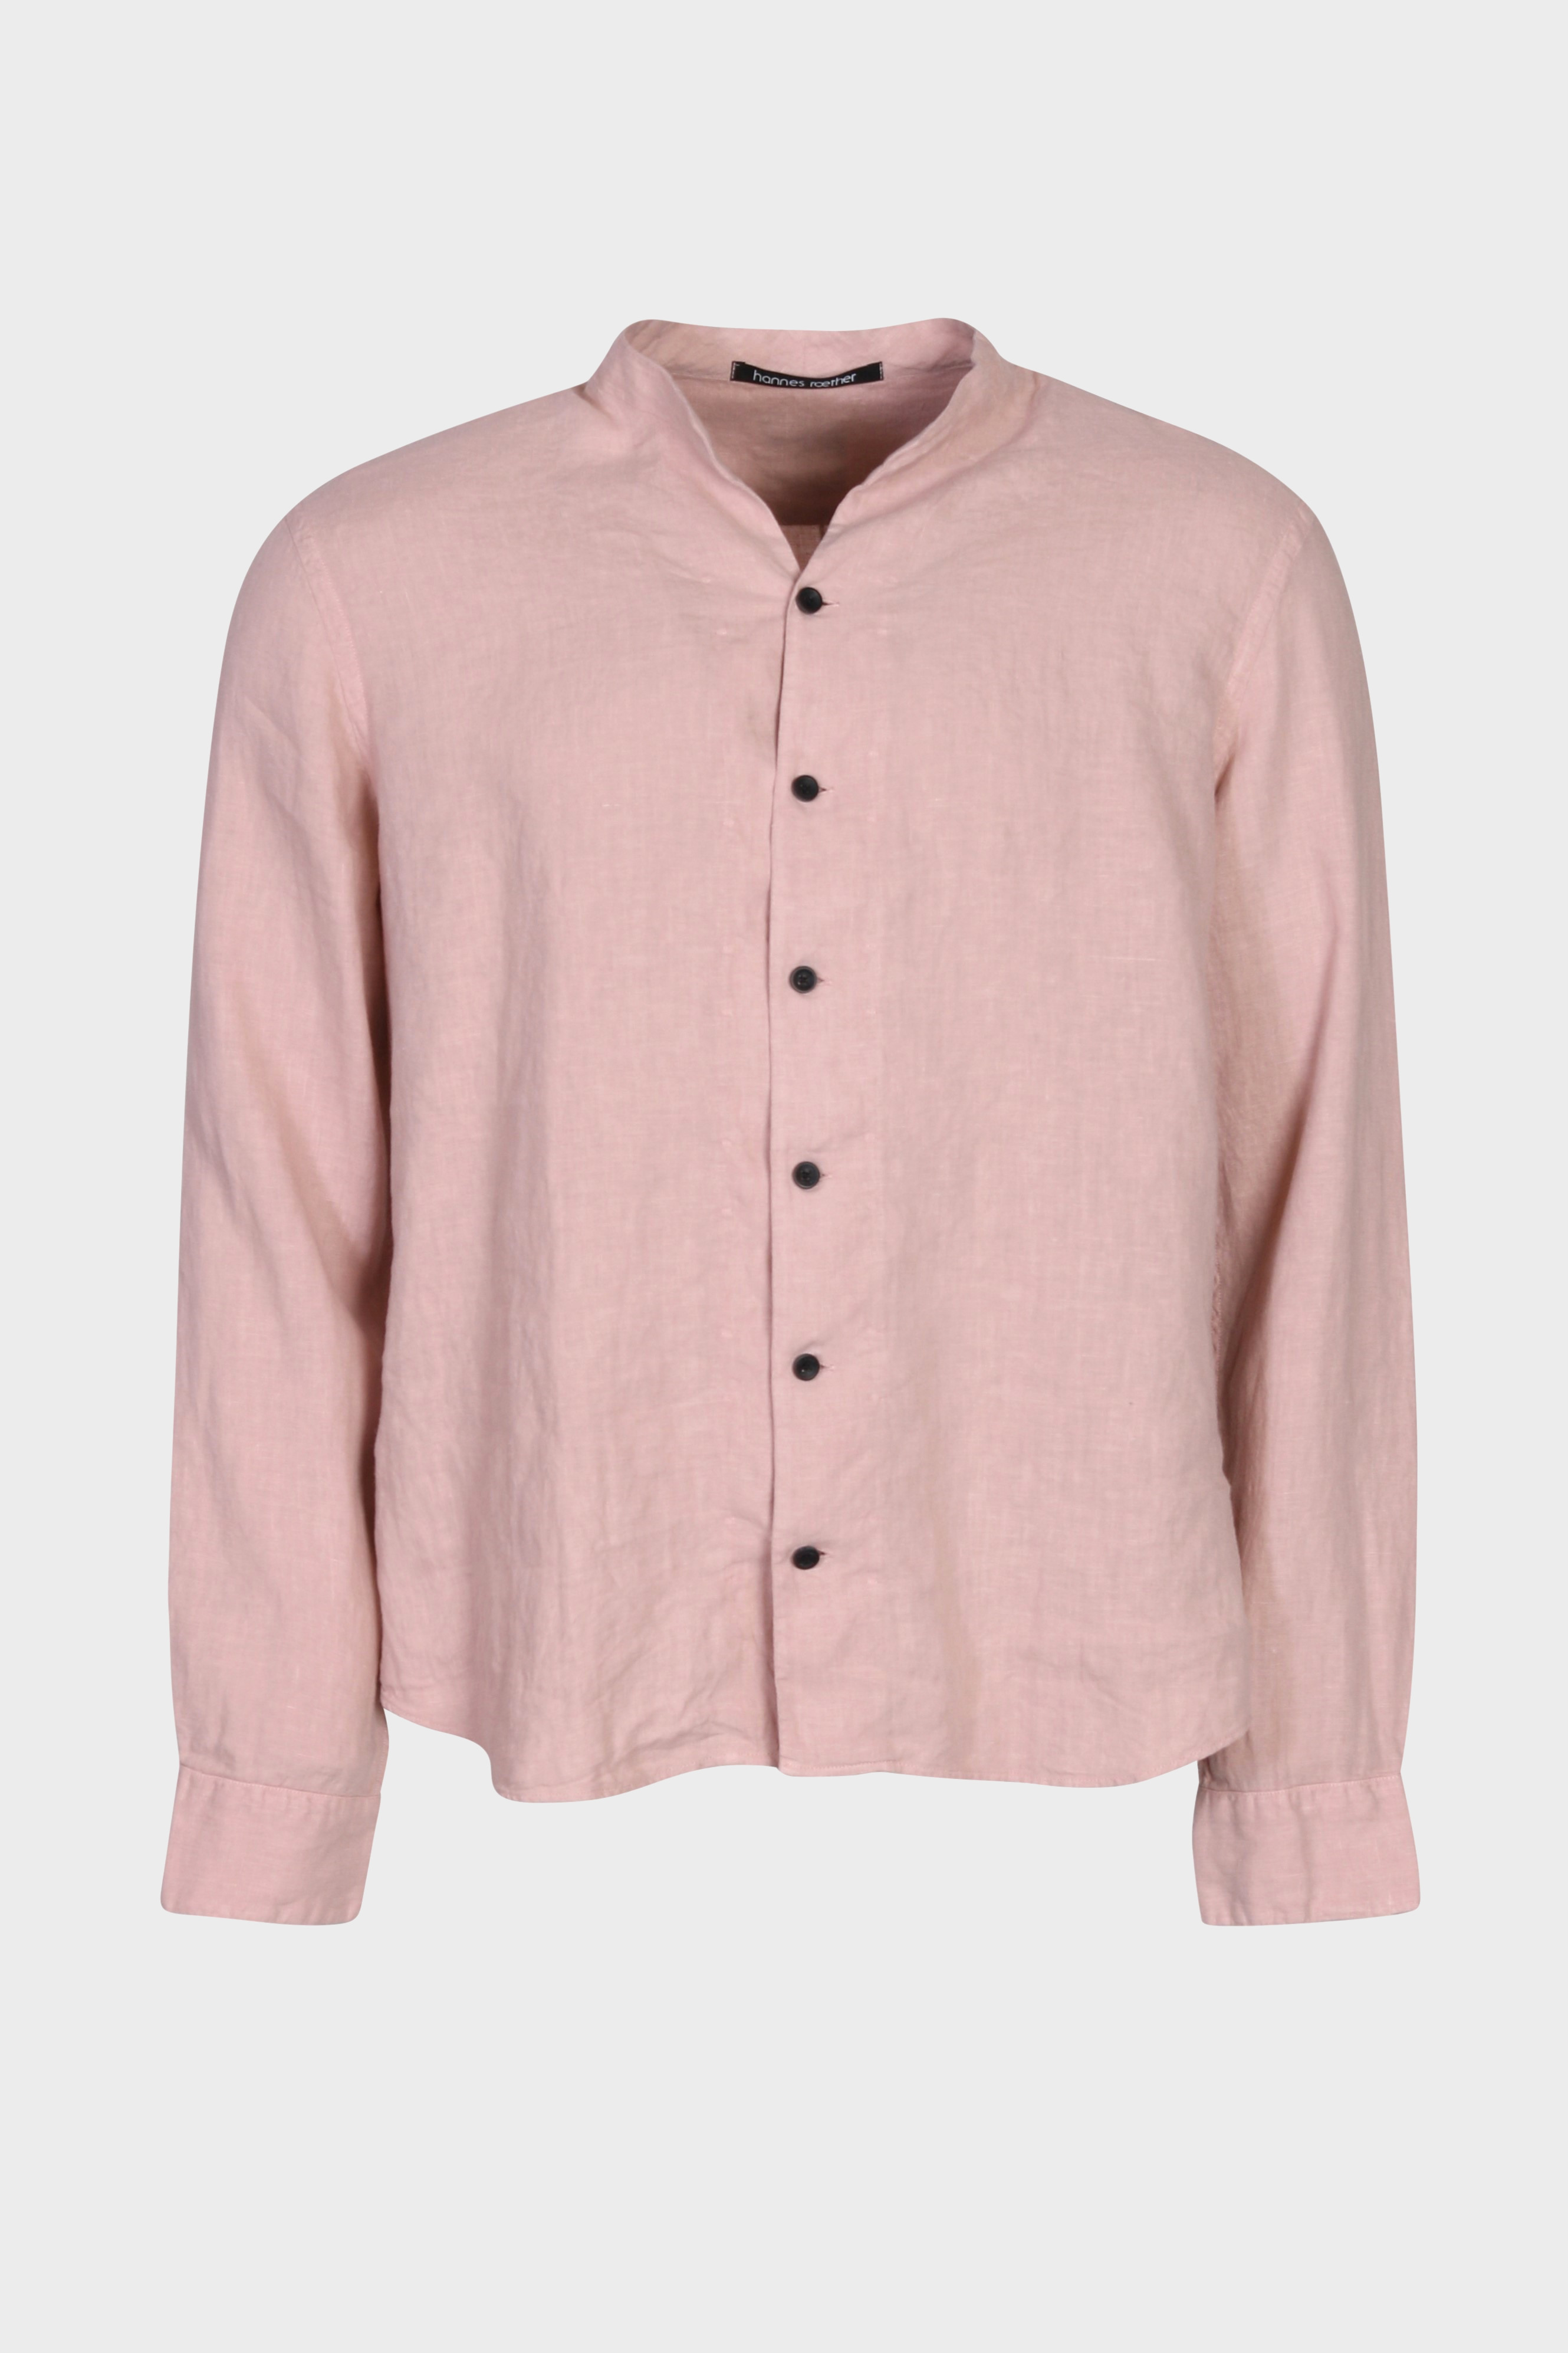 HANNES ROETHER Linen Shirt in Rosé